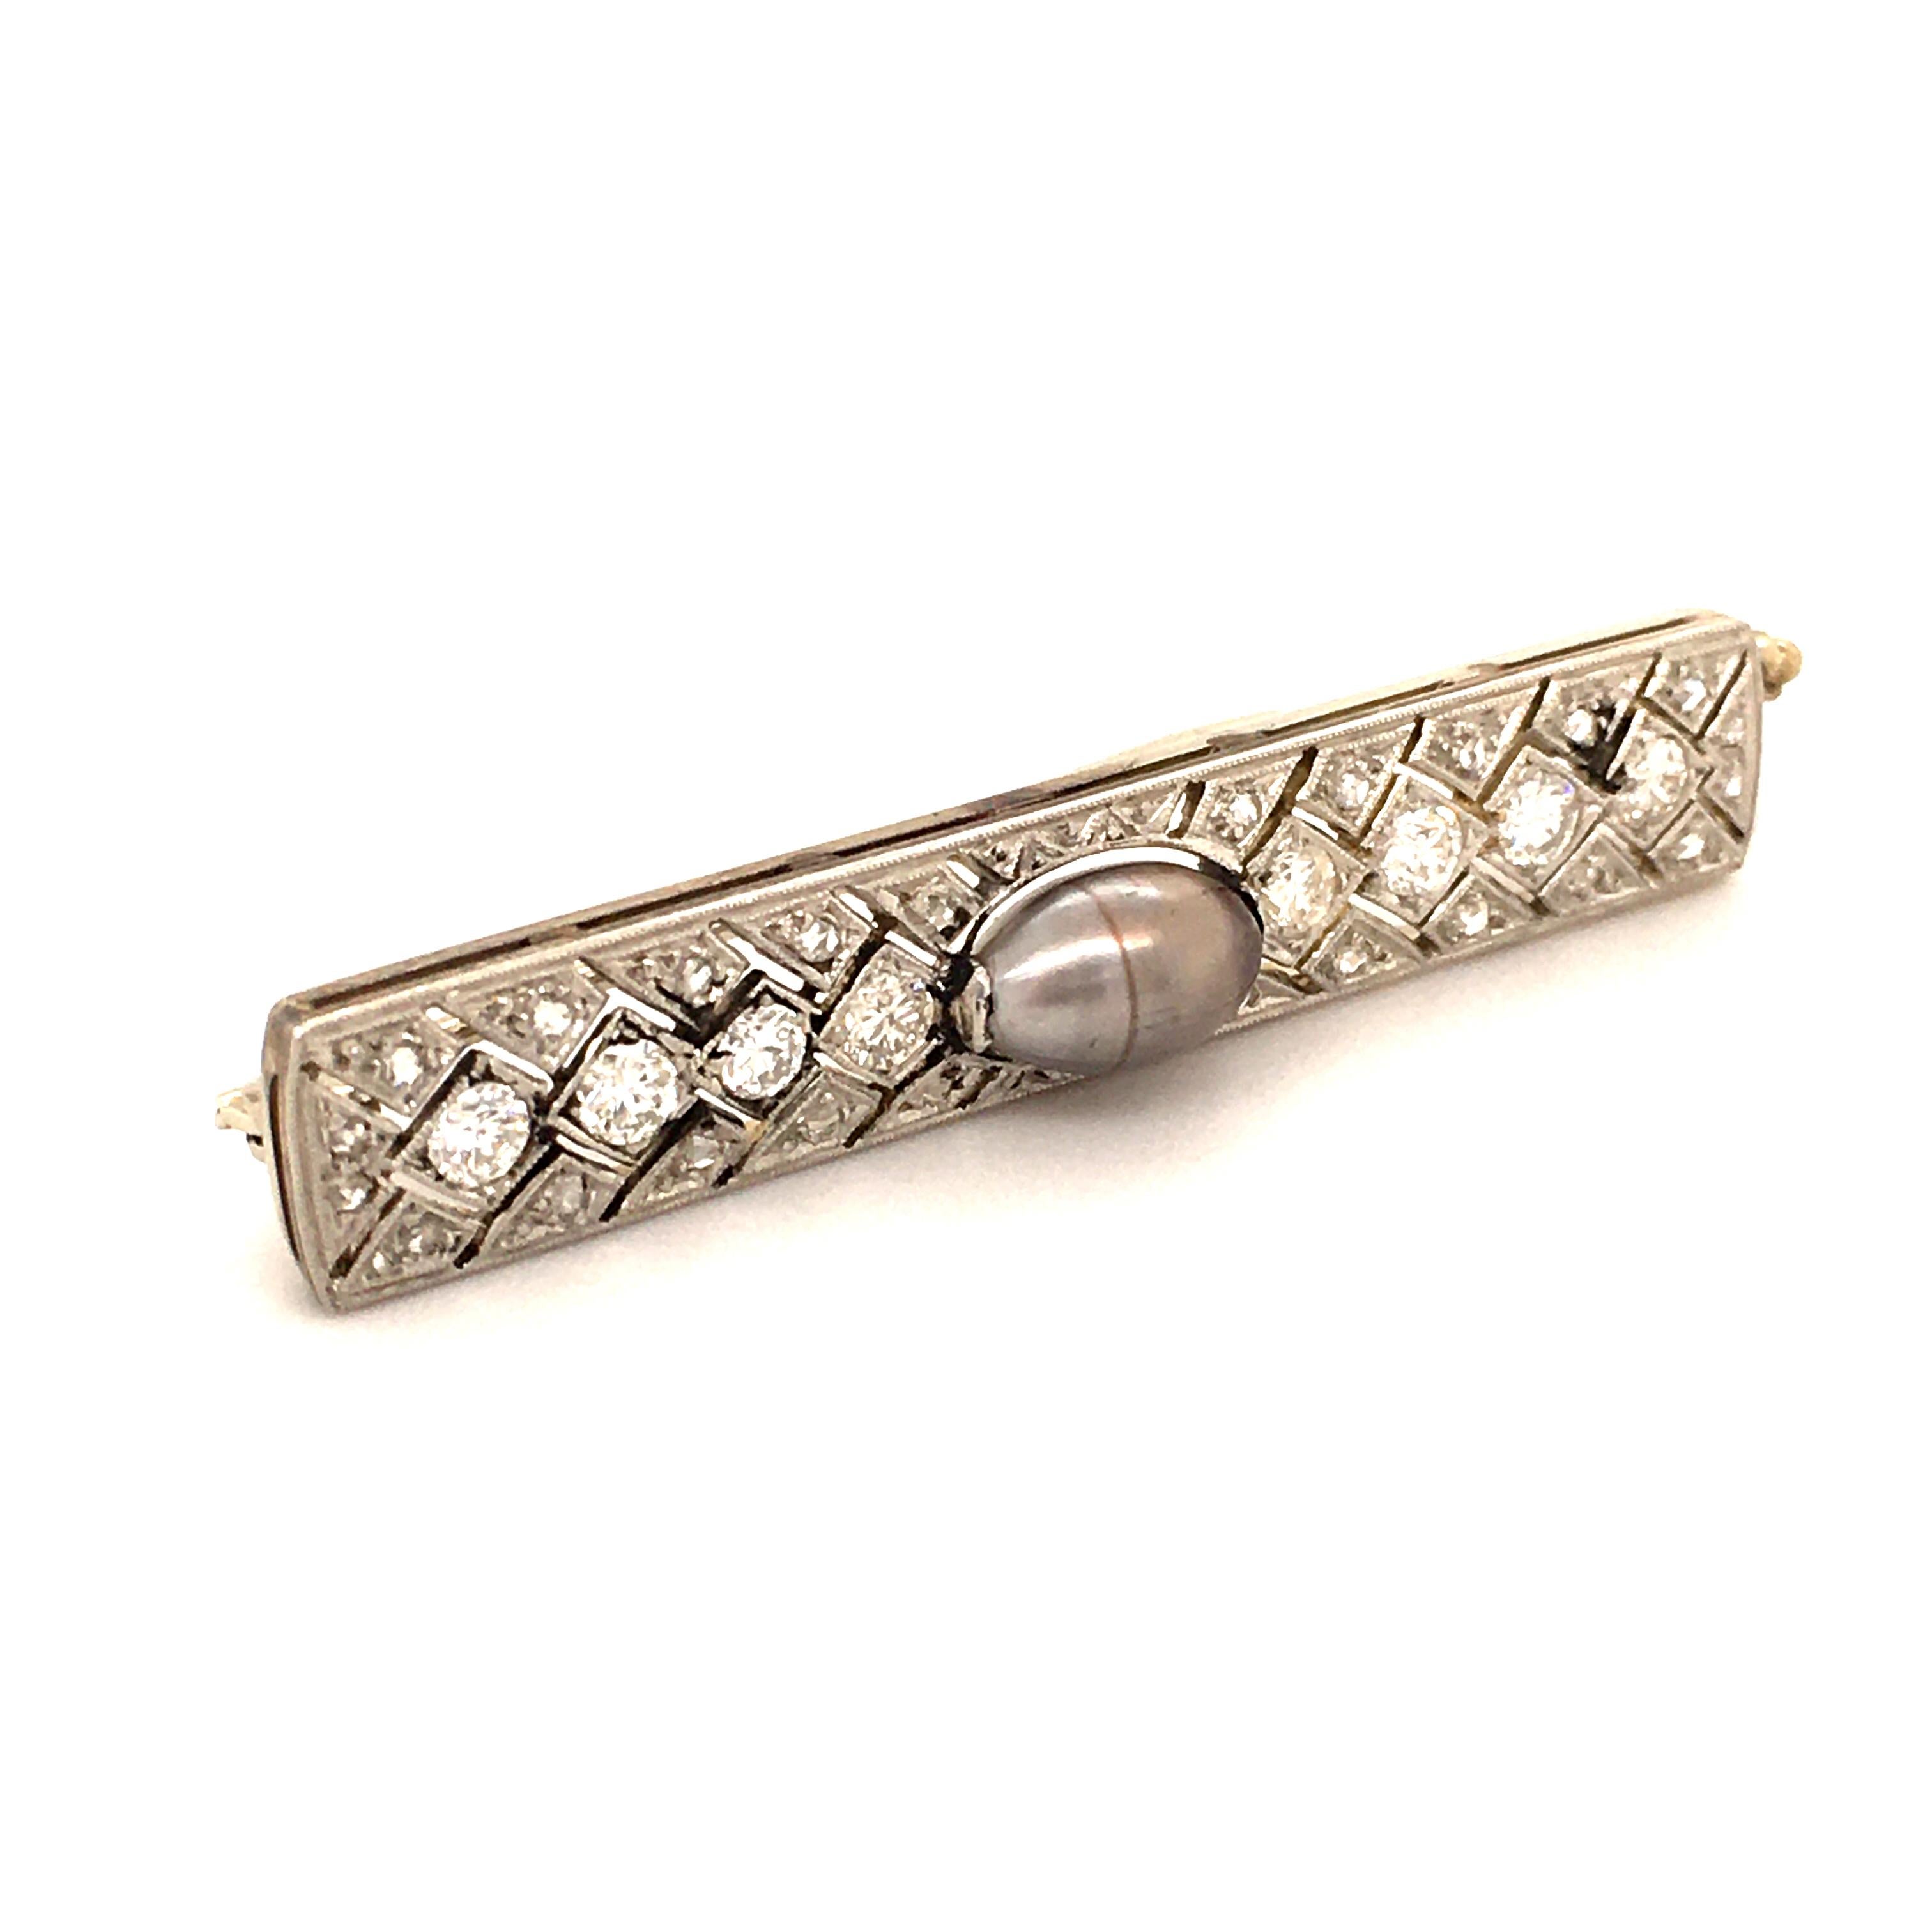 Edwardian Natural Pearl and Diamond Brooch in Platinum and 18 Karat White Gold